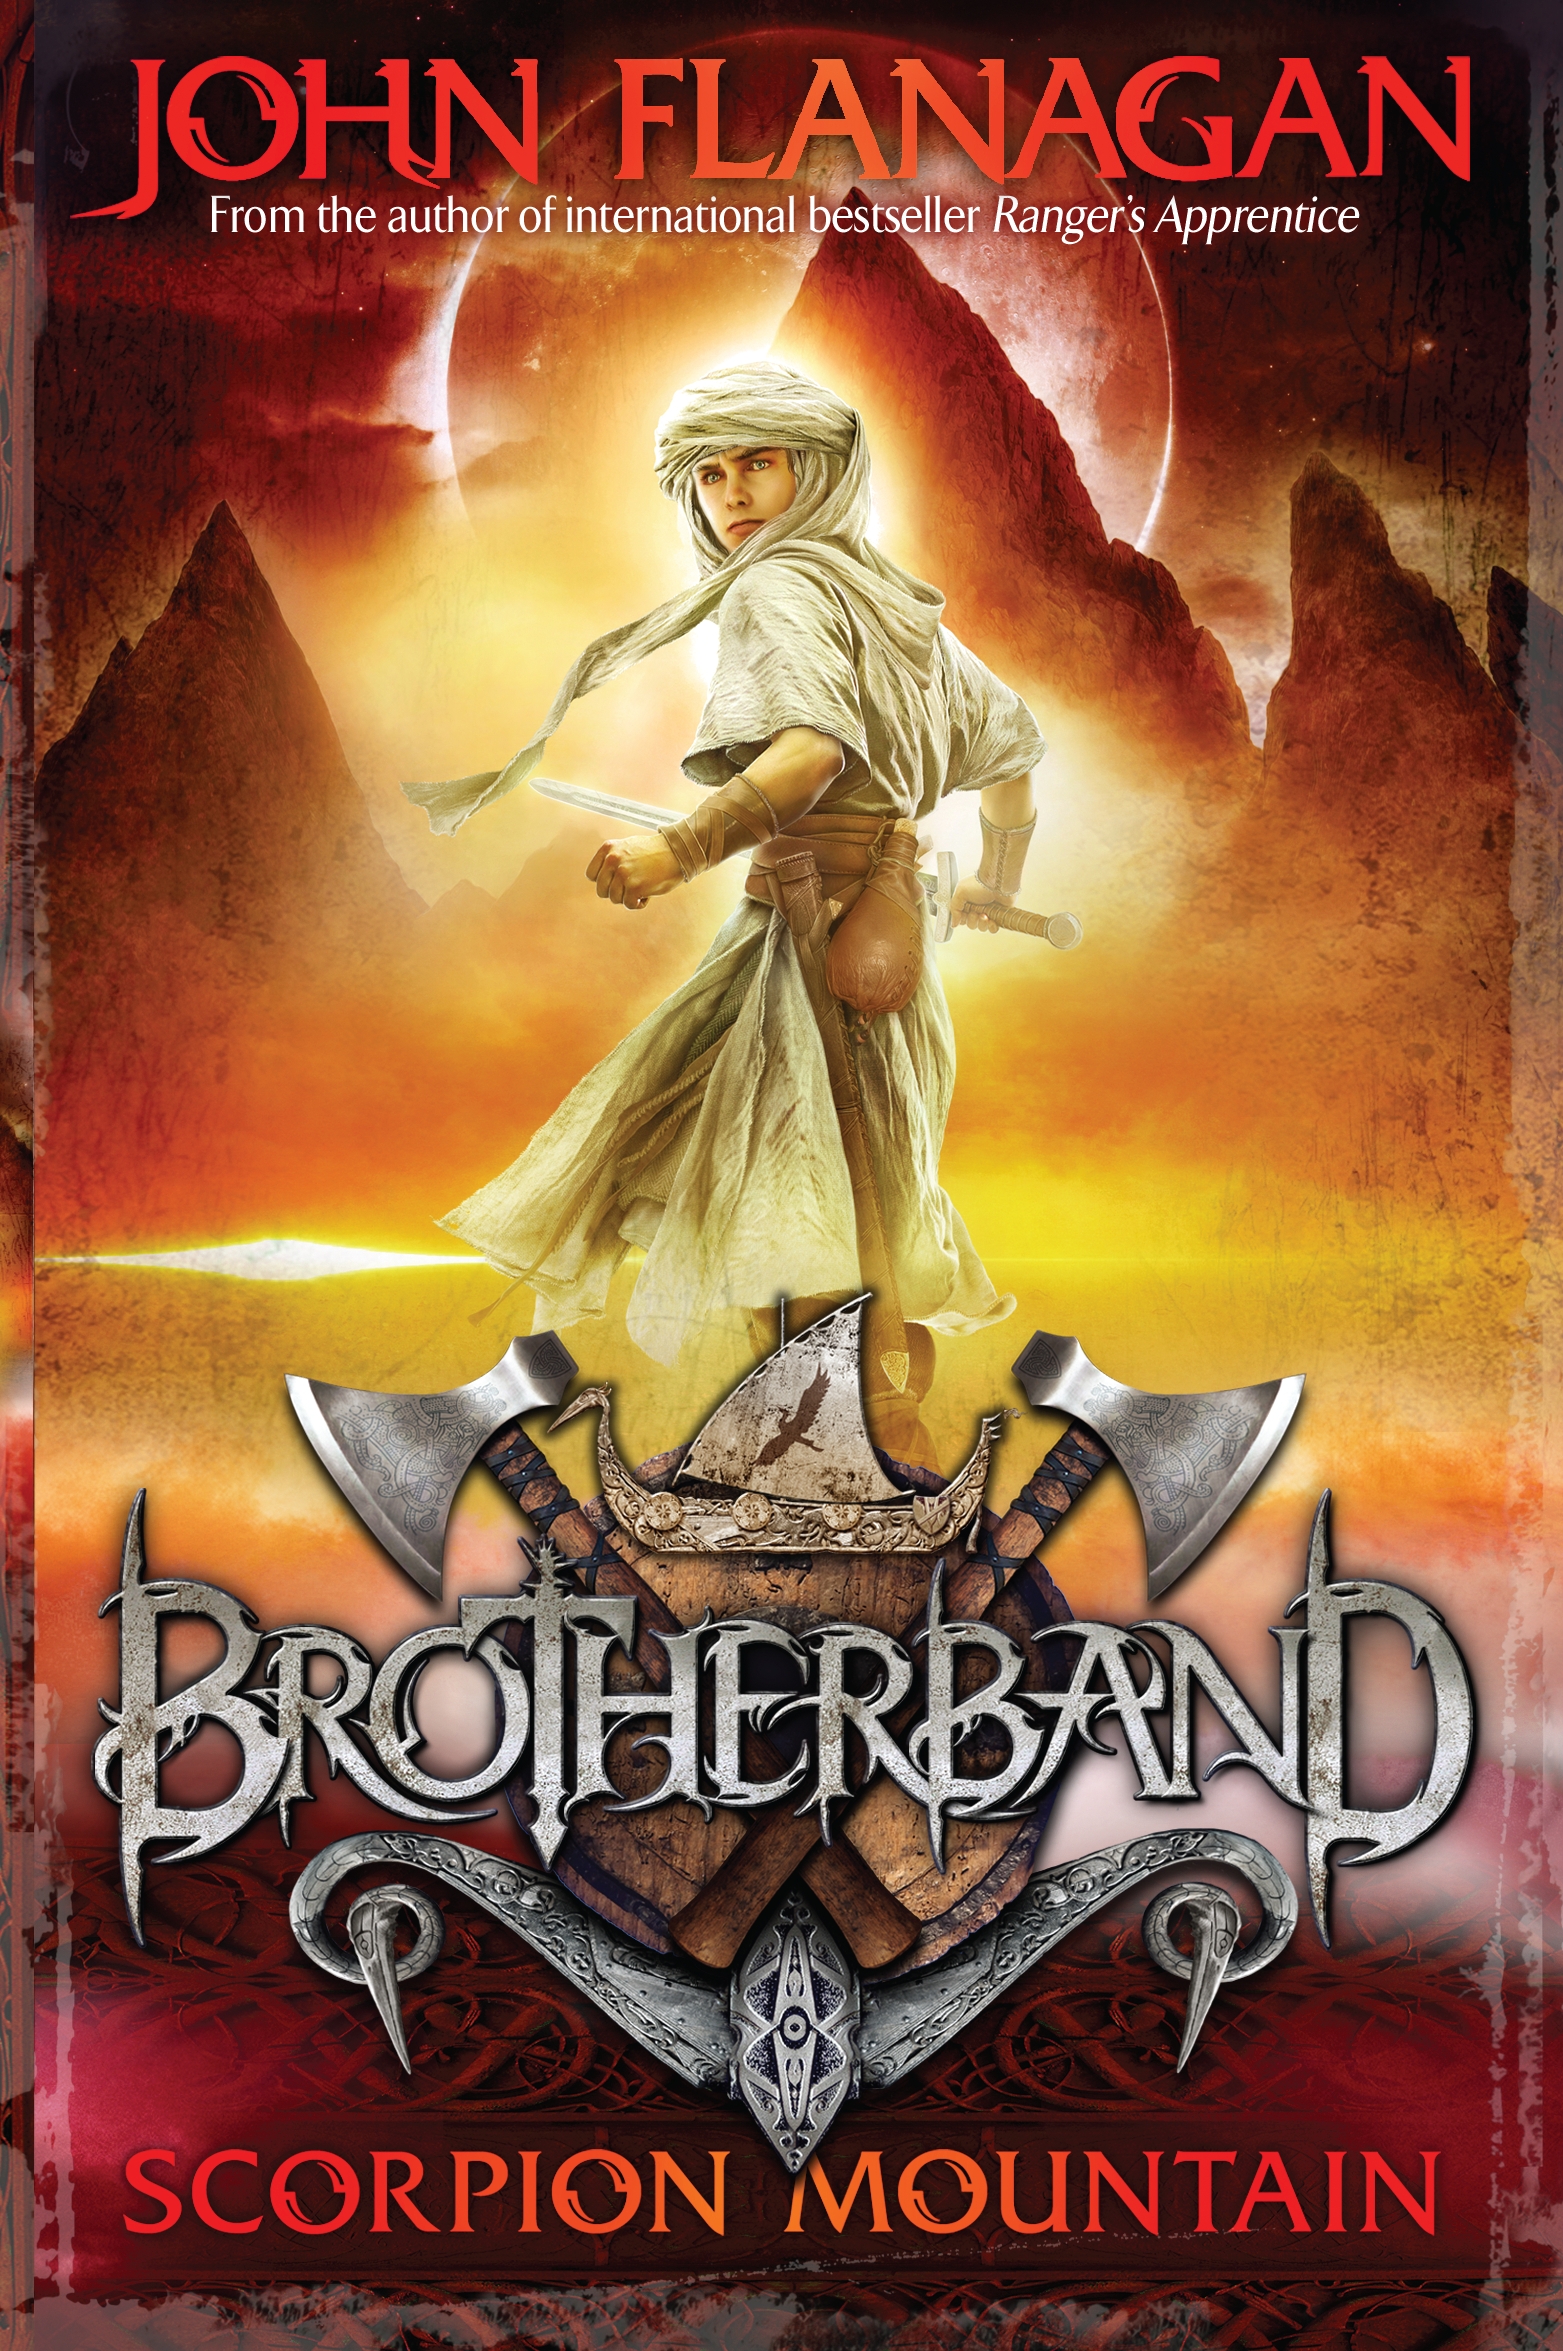 brotherband chronicles series pdf